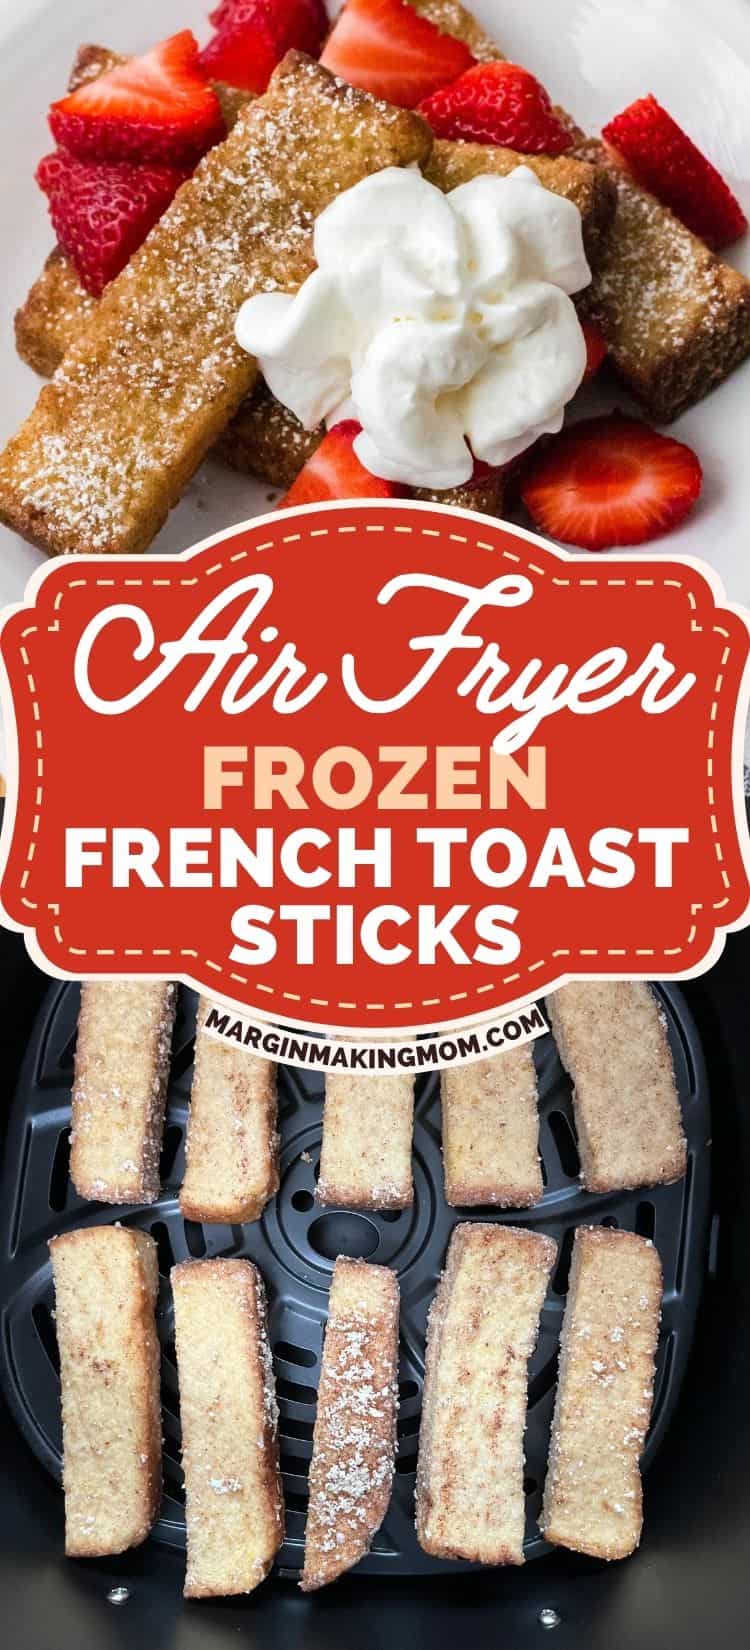 two photos; one shows frozen french toast sticks in an air fryer basket, the other shows cooked french toast sticks with strawberries and whipped cream